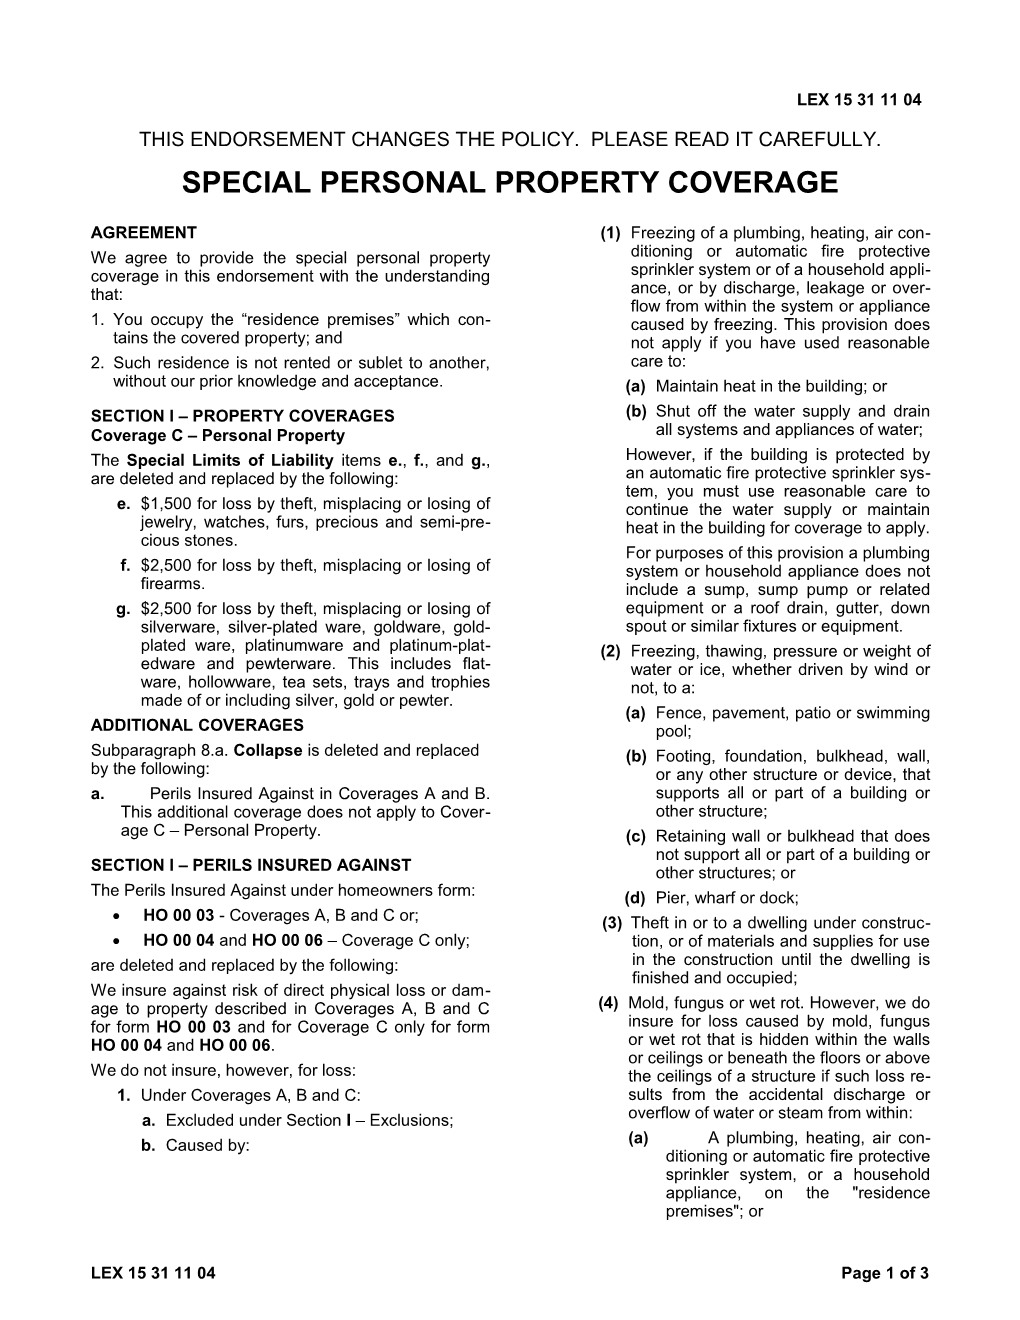 Special Personal Property Coverage